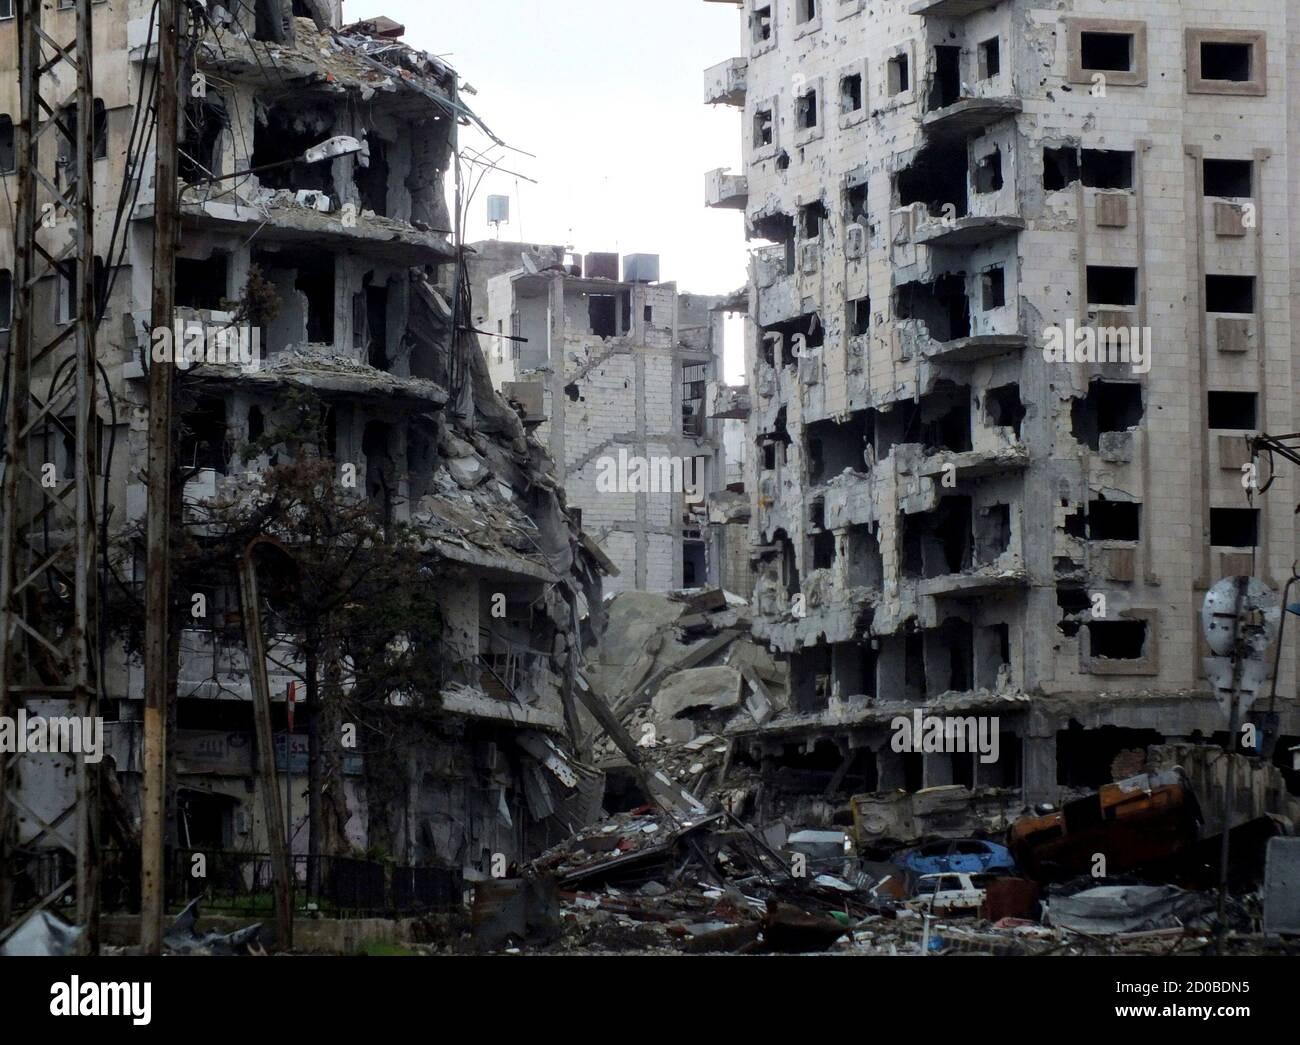 A general view of damaged buildings in Jouret al-Shayah, Homs February 2, 2013. Picture taken on February 2, 2013. REUTERS/Yazen Homsy (SYRIA - Tags: CONFLICT POLITICS CIVIL UNREST) Stock Photo